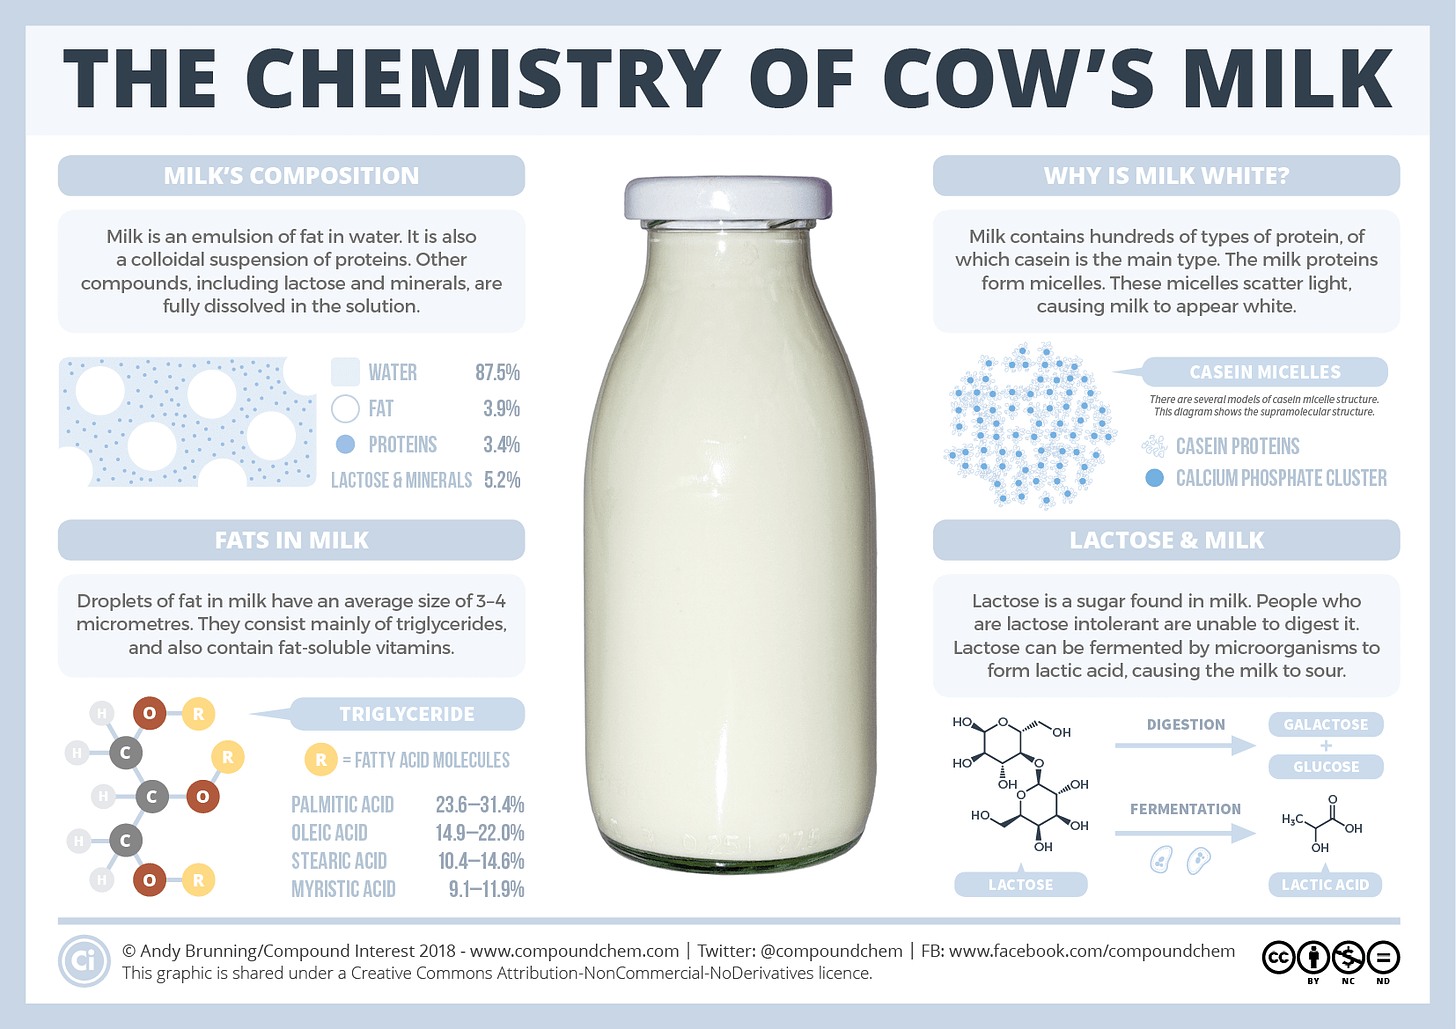 Infographic on the chemistry of cow's milk. Milk is an emulsion of fat in water, and a colloidal suspension of proteins. Other compounds are dissolved in the solution. Droplets of fat, with an average diameter of 3-4 micrometres, consist of triglycerides and contain fat-soluble vitamins. Milk proteins form micelles which scatter light, making milk appear white. Lactose, a sugar found in milk, cannot be digested by those who are lactose intolerant.